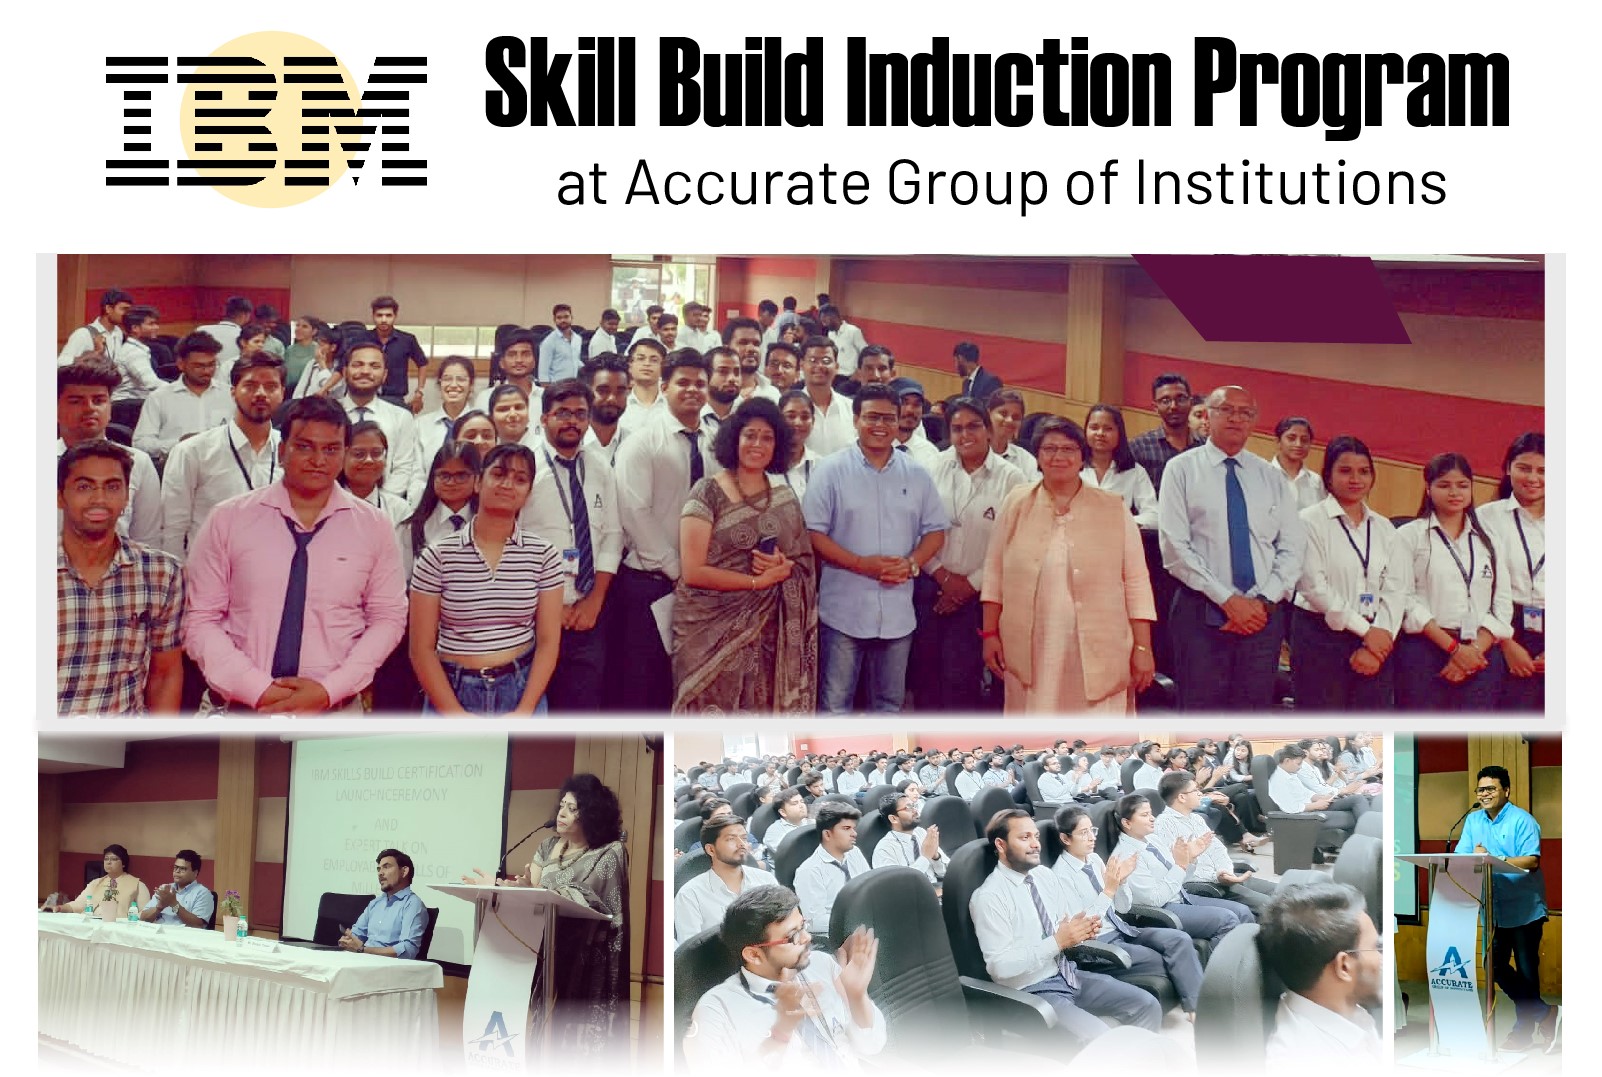 IBM Skill Build Induction Program at Accurate Group of Institutions.